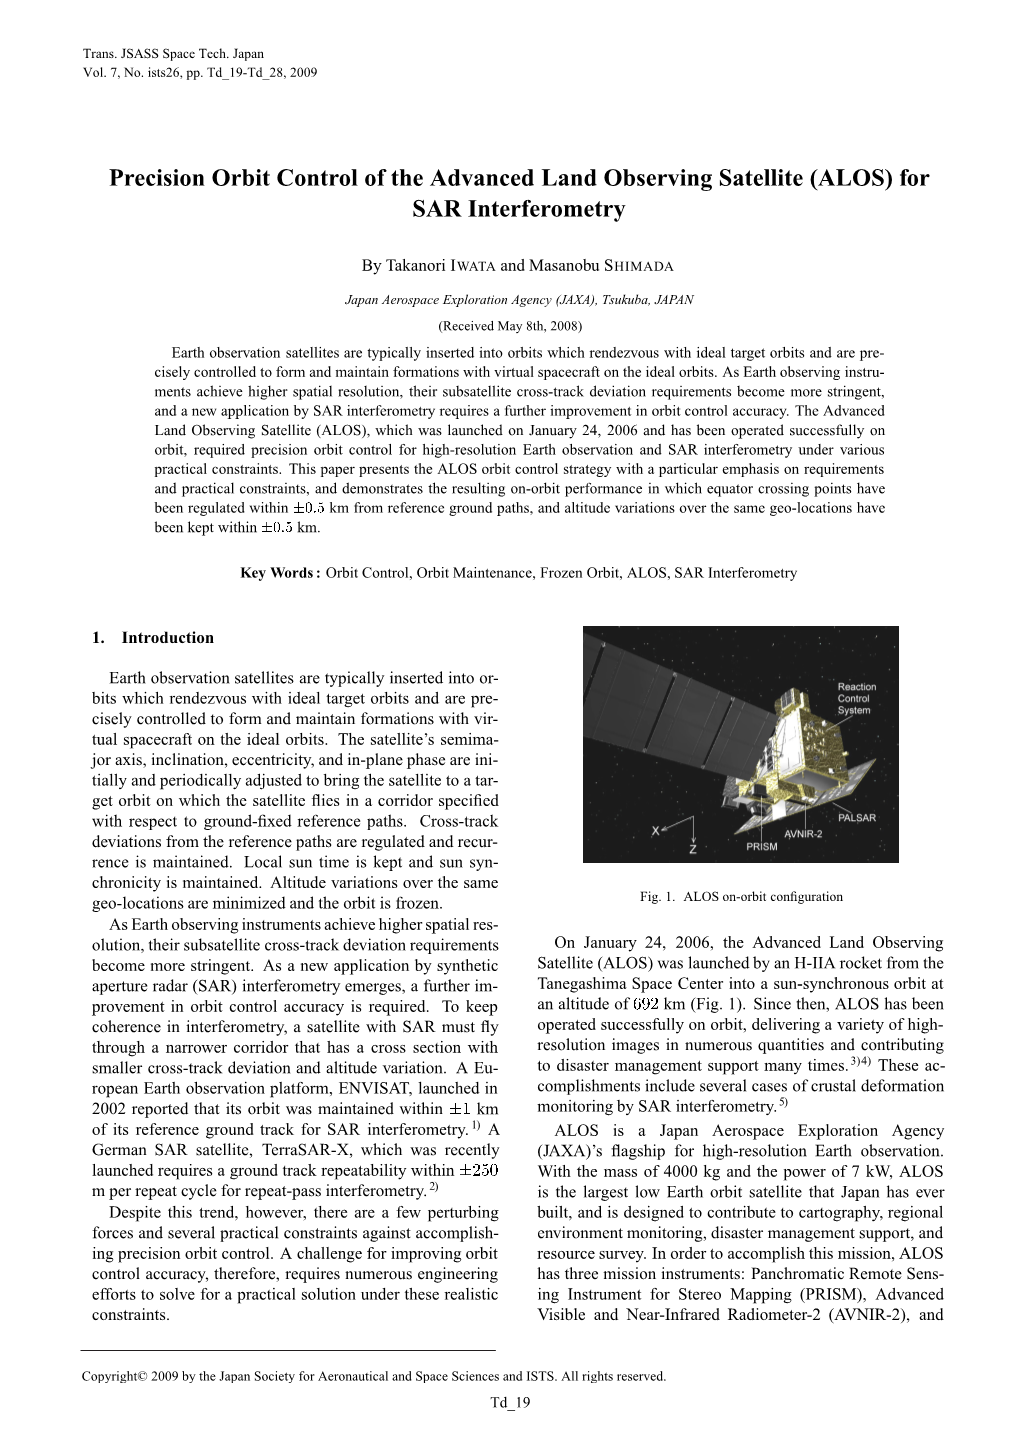 Precision Orbit Control of the Advanced Land Observing Satellite (ALOS) for SAR Interferometry